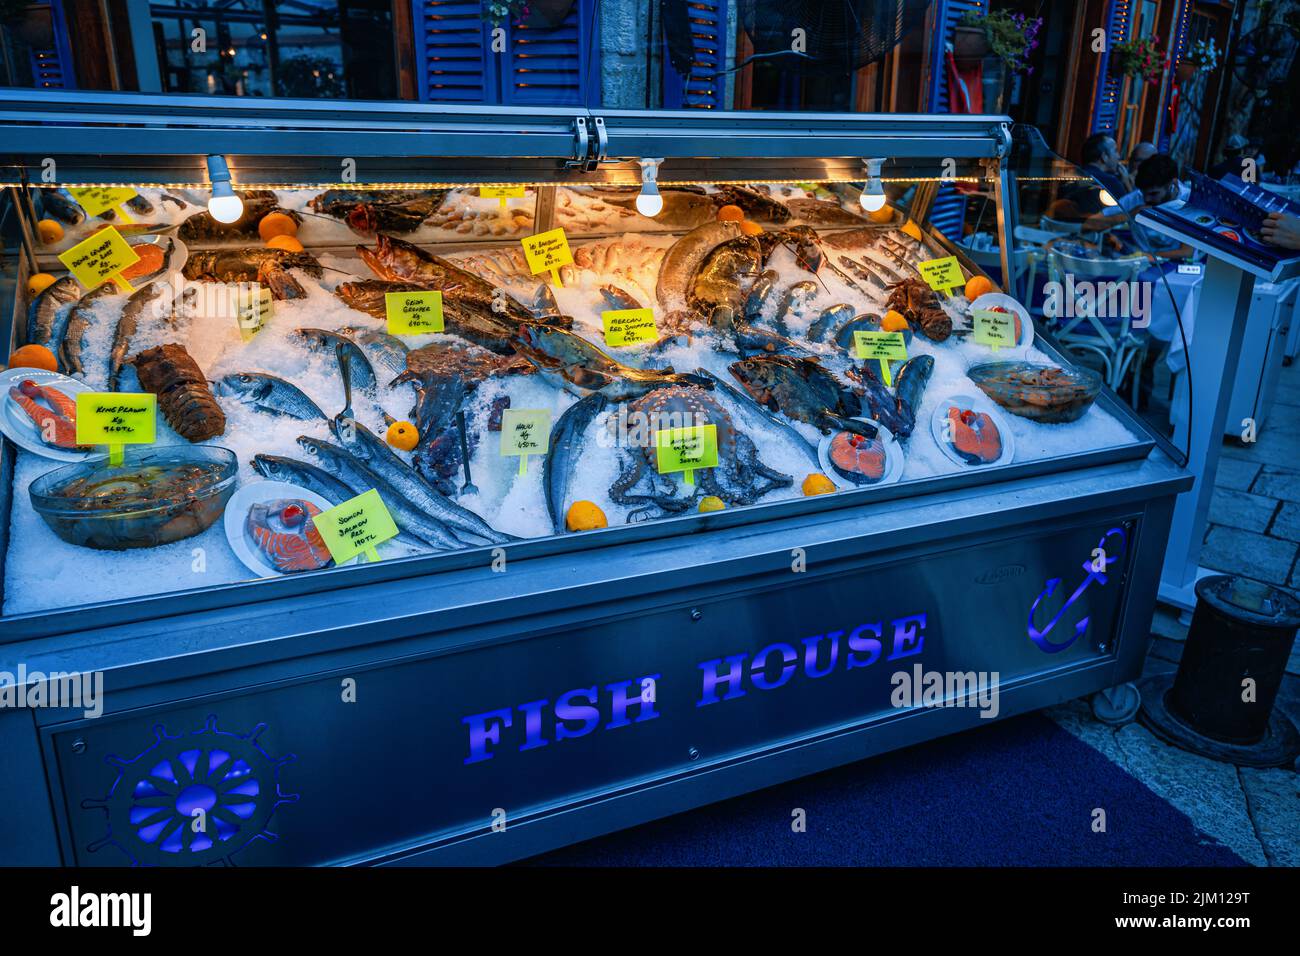 21 June 2022, Antalya, Turkey: an assortment of fresh fish and seafood is sold on display with ice. Stock Photo